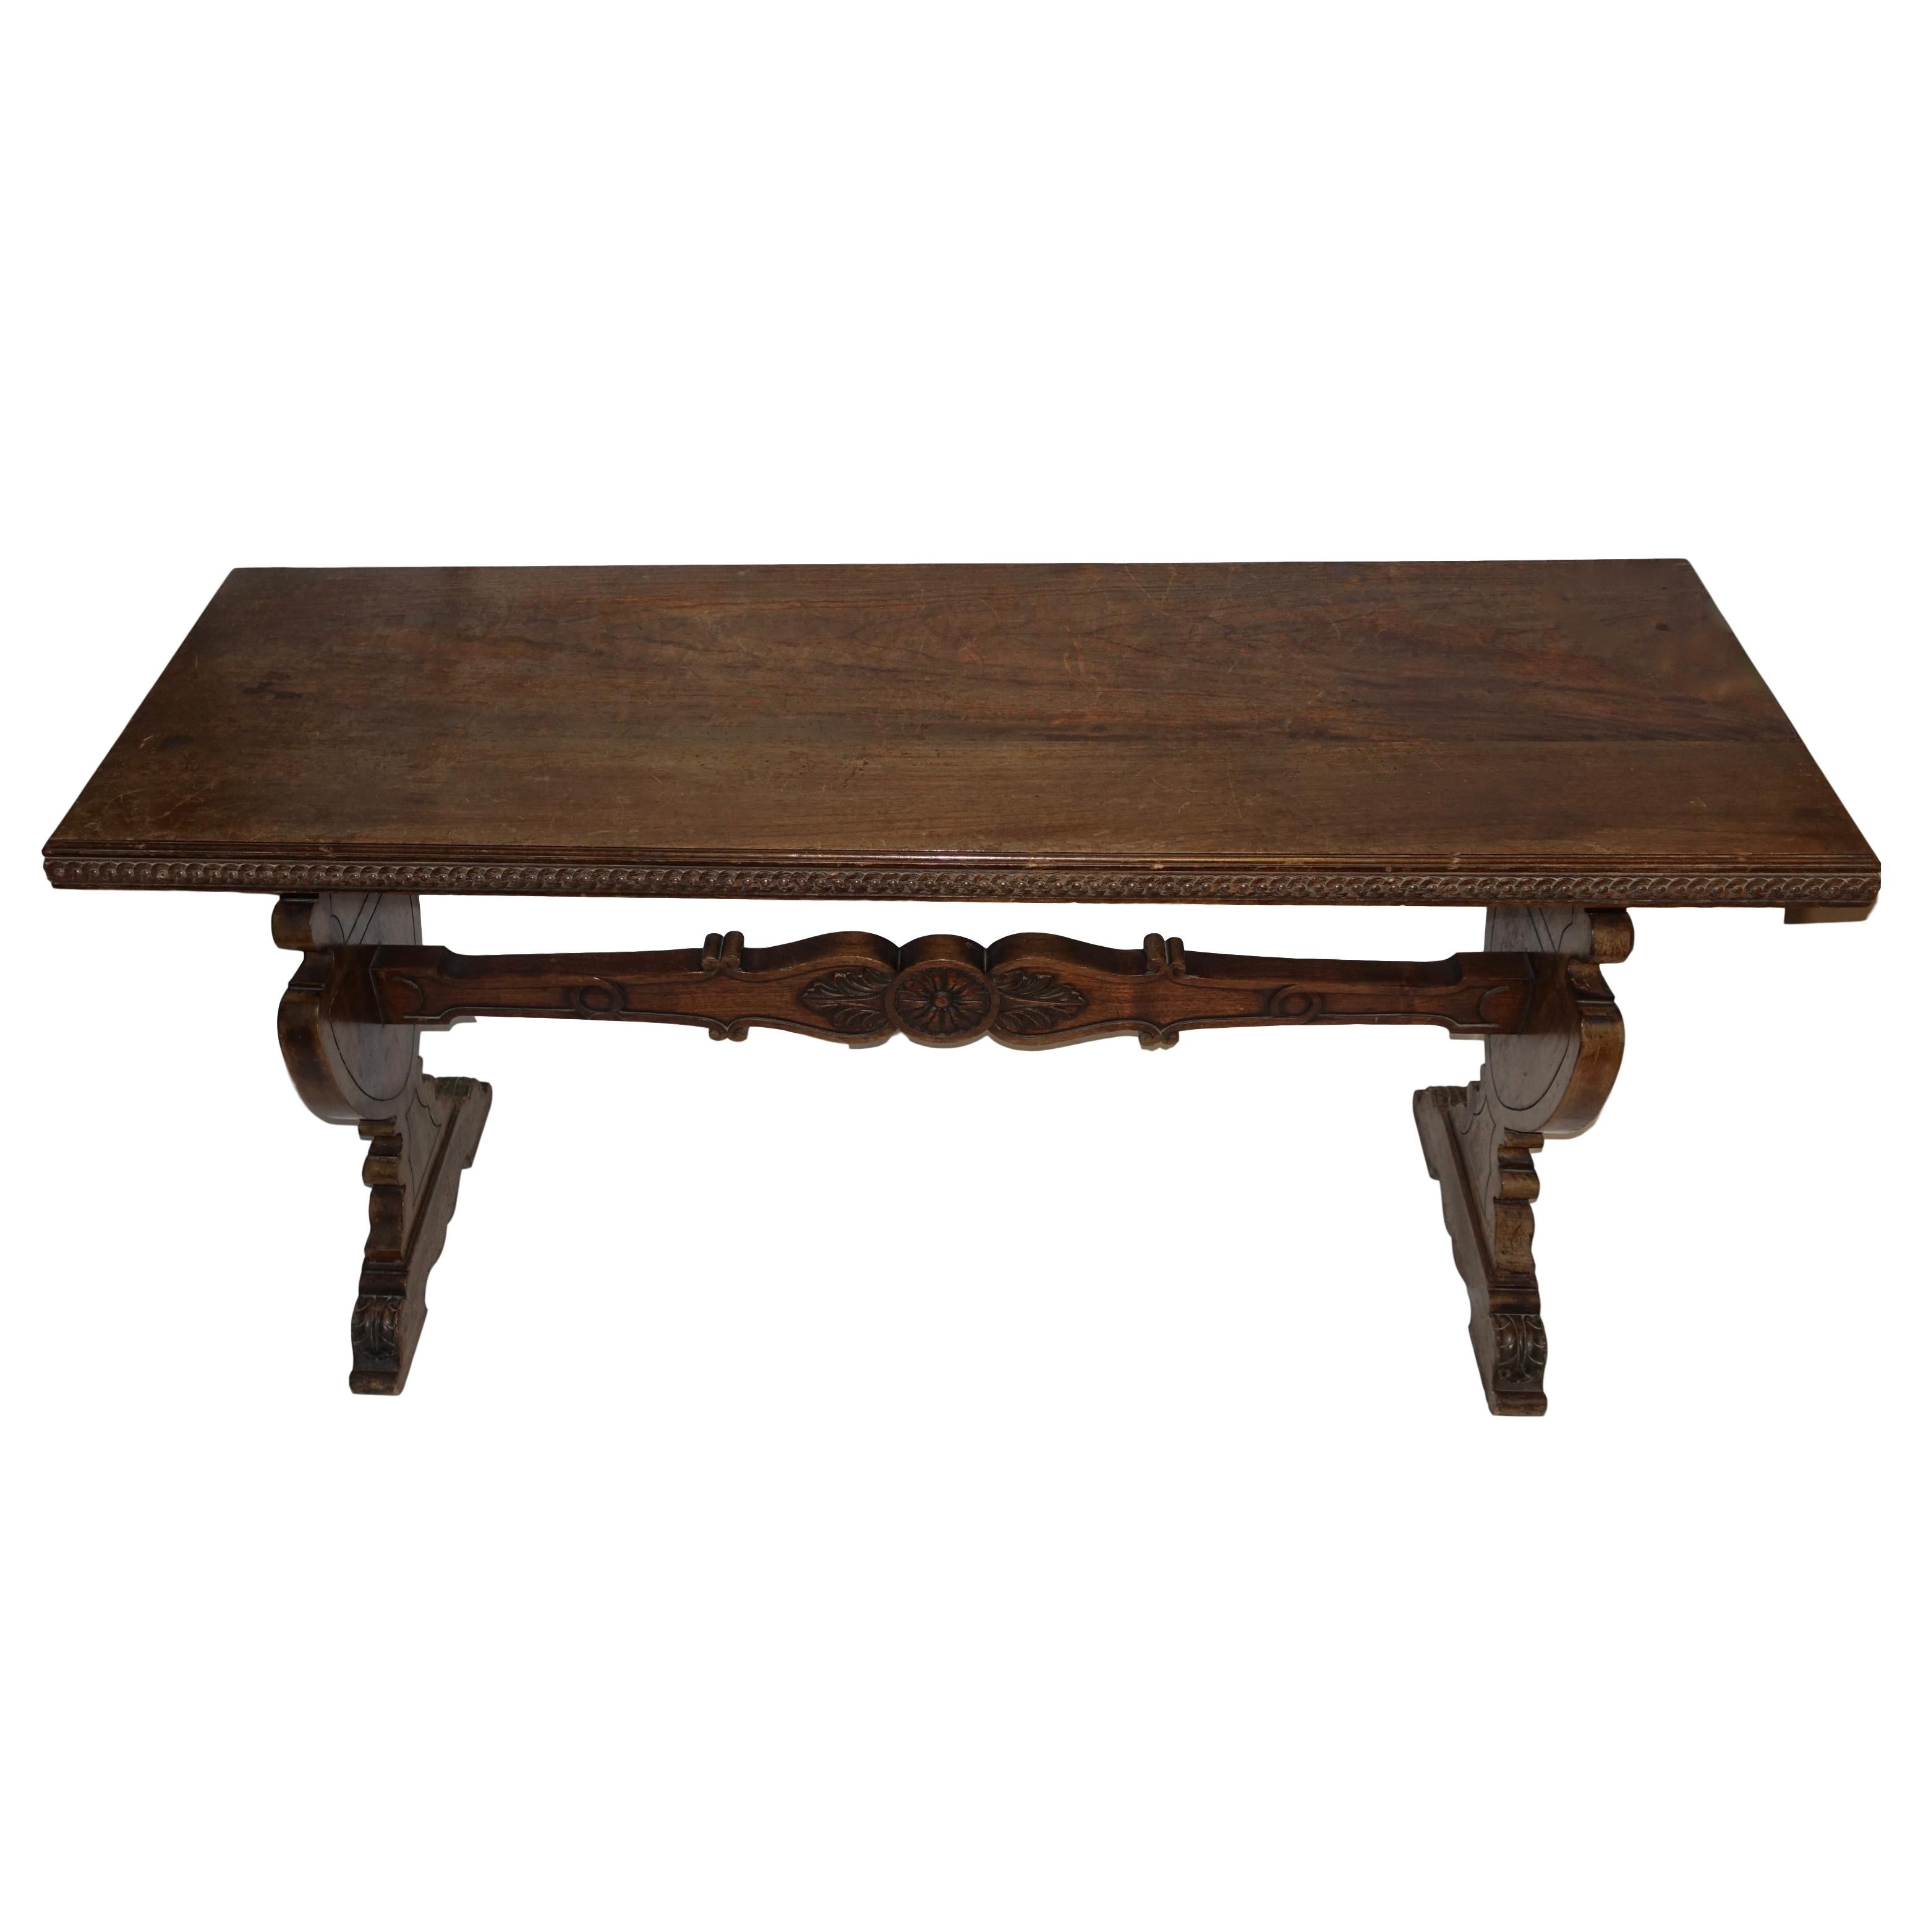 A circa 1920s Spanish carved walnut console table.

Measurements:
Height 31?
Width/length 59?
Depth 19?